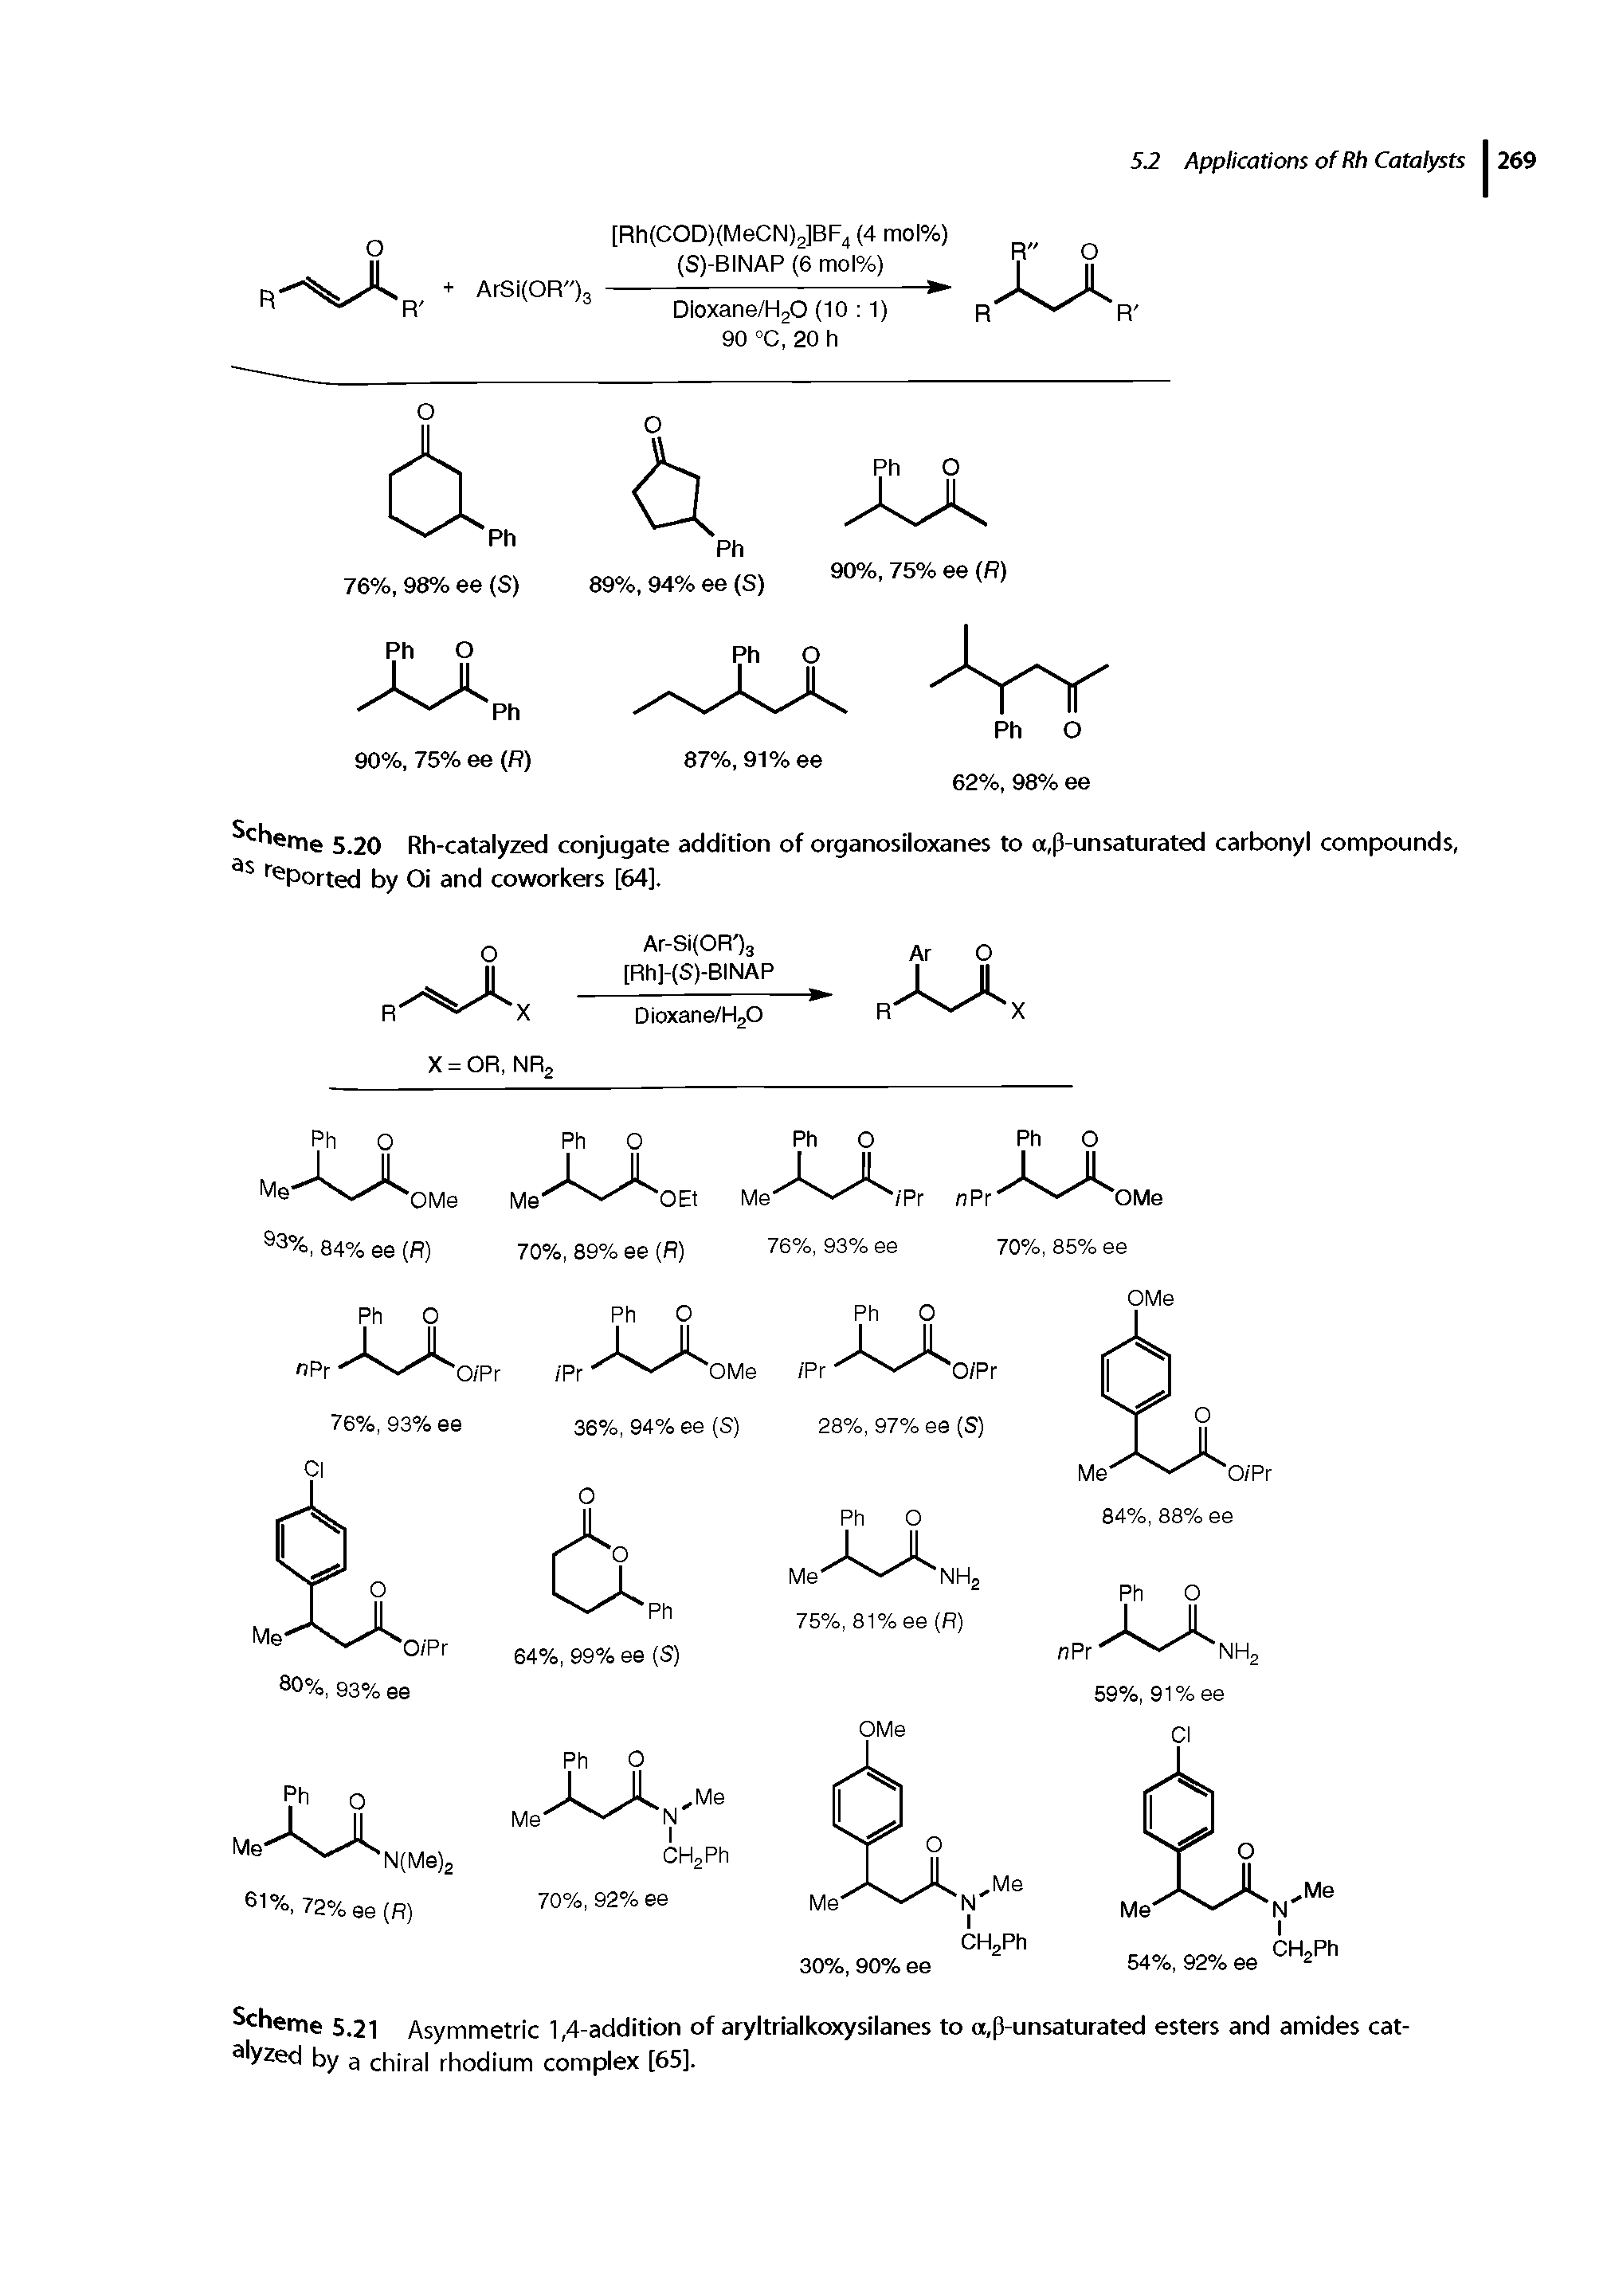 Scheme 5.21 Asymmetric 1,4-addition of aryltrialkoxysilanes to a,p-unsaturated esters and amides catalyzed by a chiral rhodium complex [65].